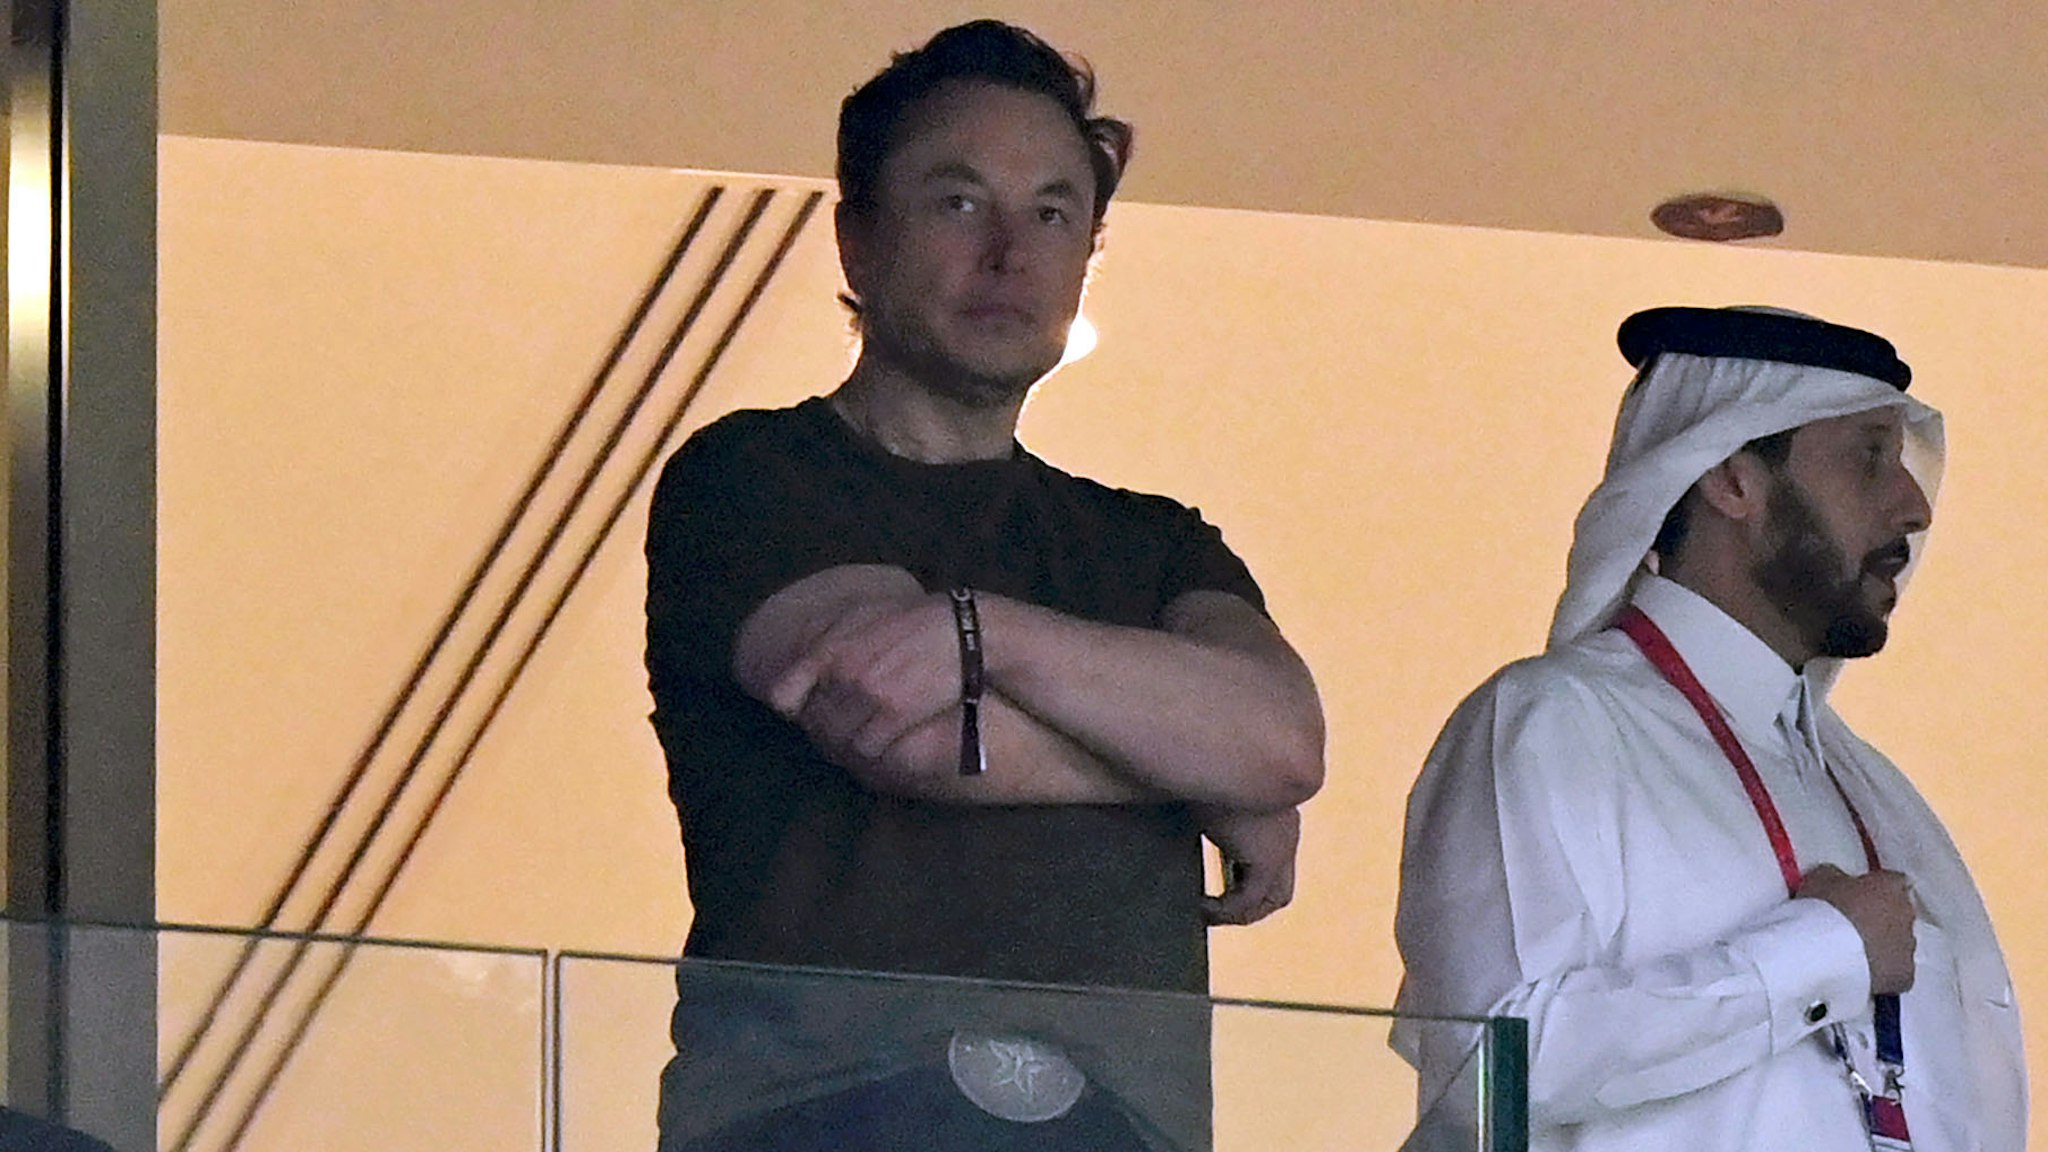 LUSAIL CITY, QATAR - DECEMBER 18: Jared Kushner and Elon Musk look on during the FIFA World Cup Qatar 2022 Final match between Argentina and France at Lusail Stadium on December 18, 2022 in Lusail City, Qatar.